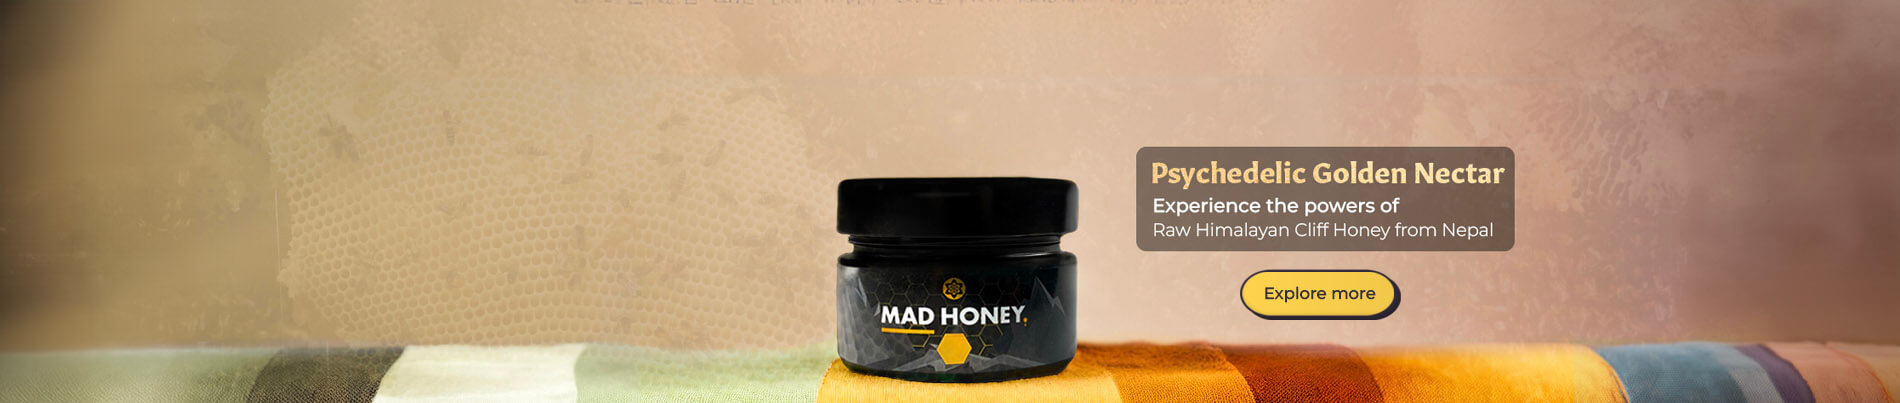 Discover Mad Honey, Psychedelic Golden Nectar from Nepal